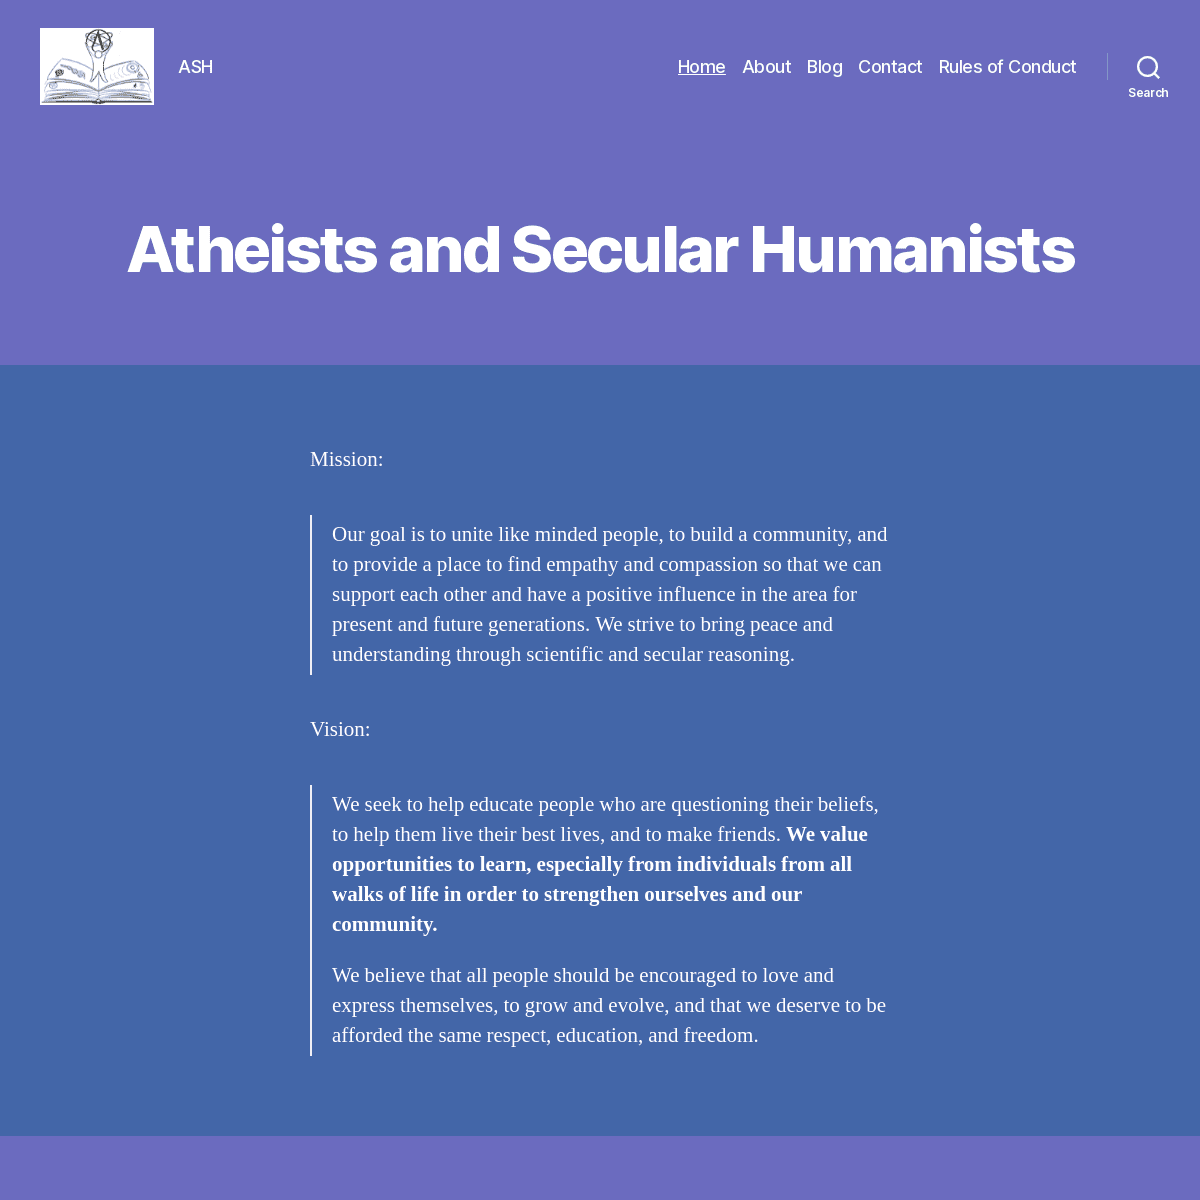 A complete backup of https://atheistsecularhumanist.org